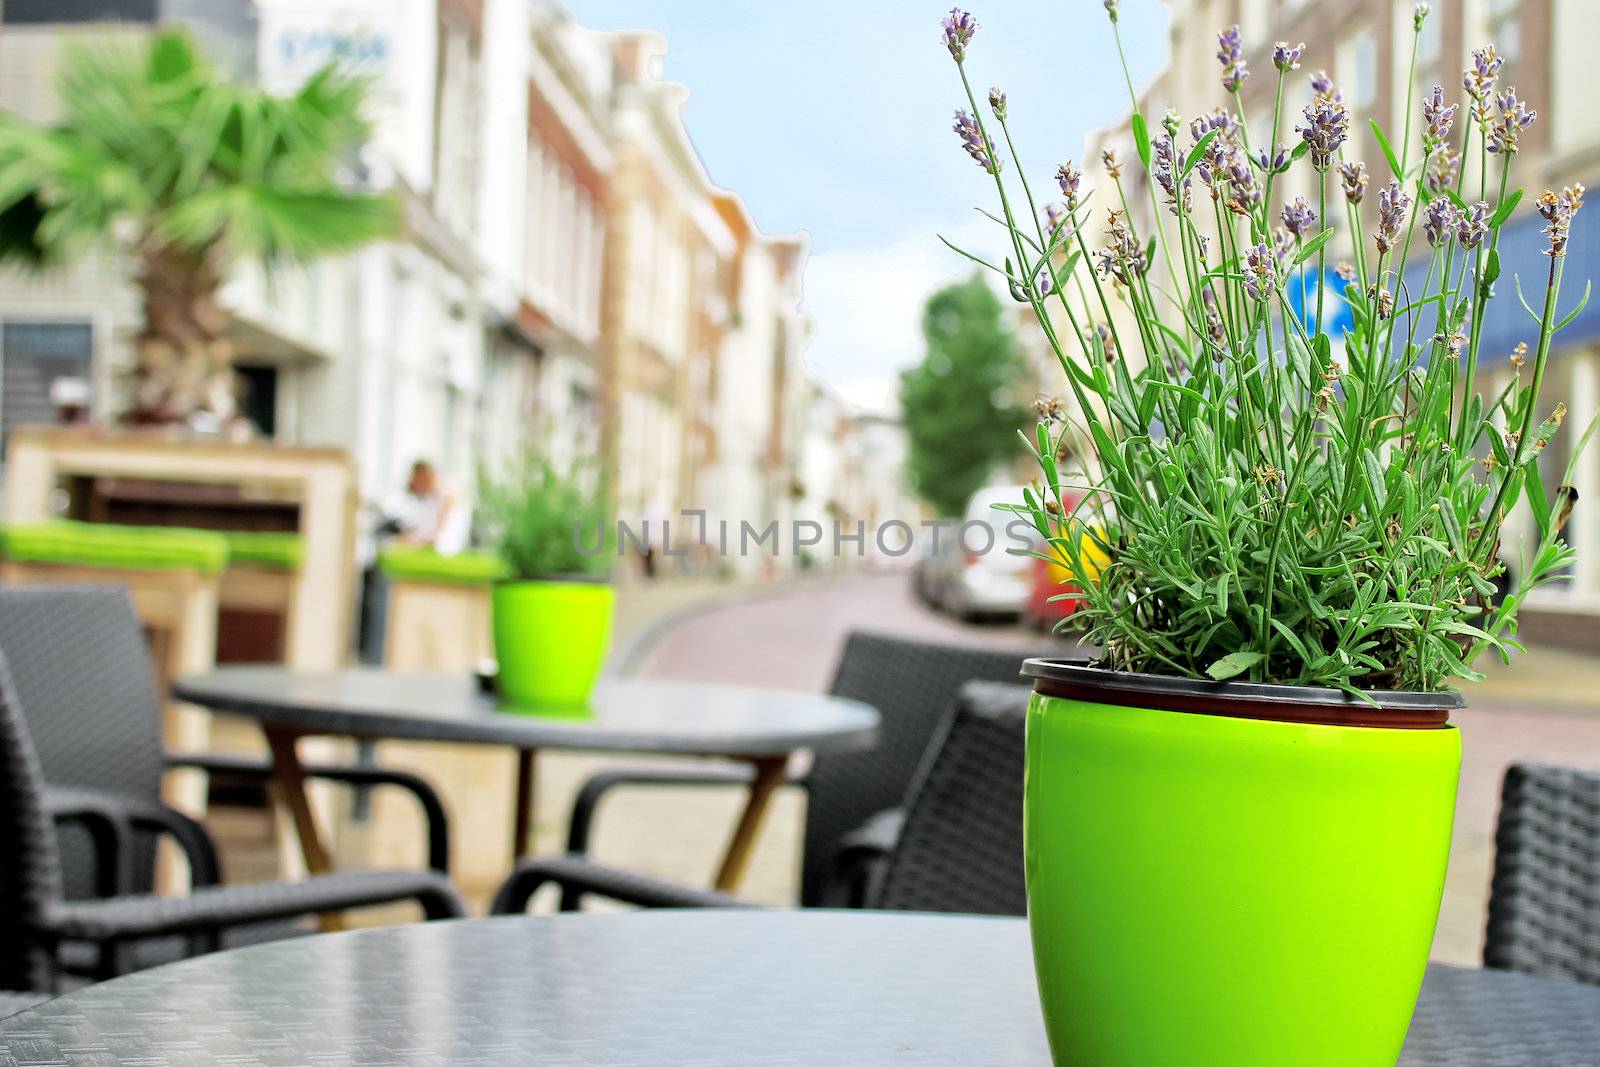 Flowers on the tables of street cafes. Gorinchem. Netherlands  by NickNick